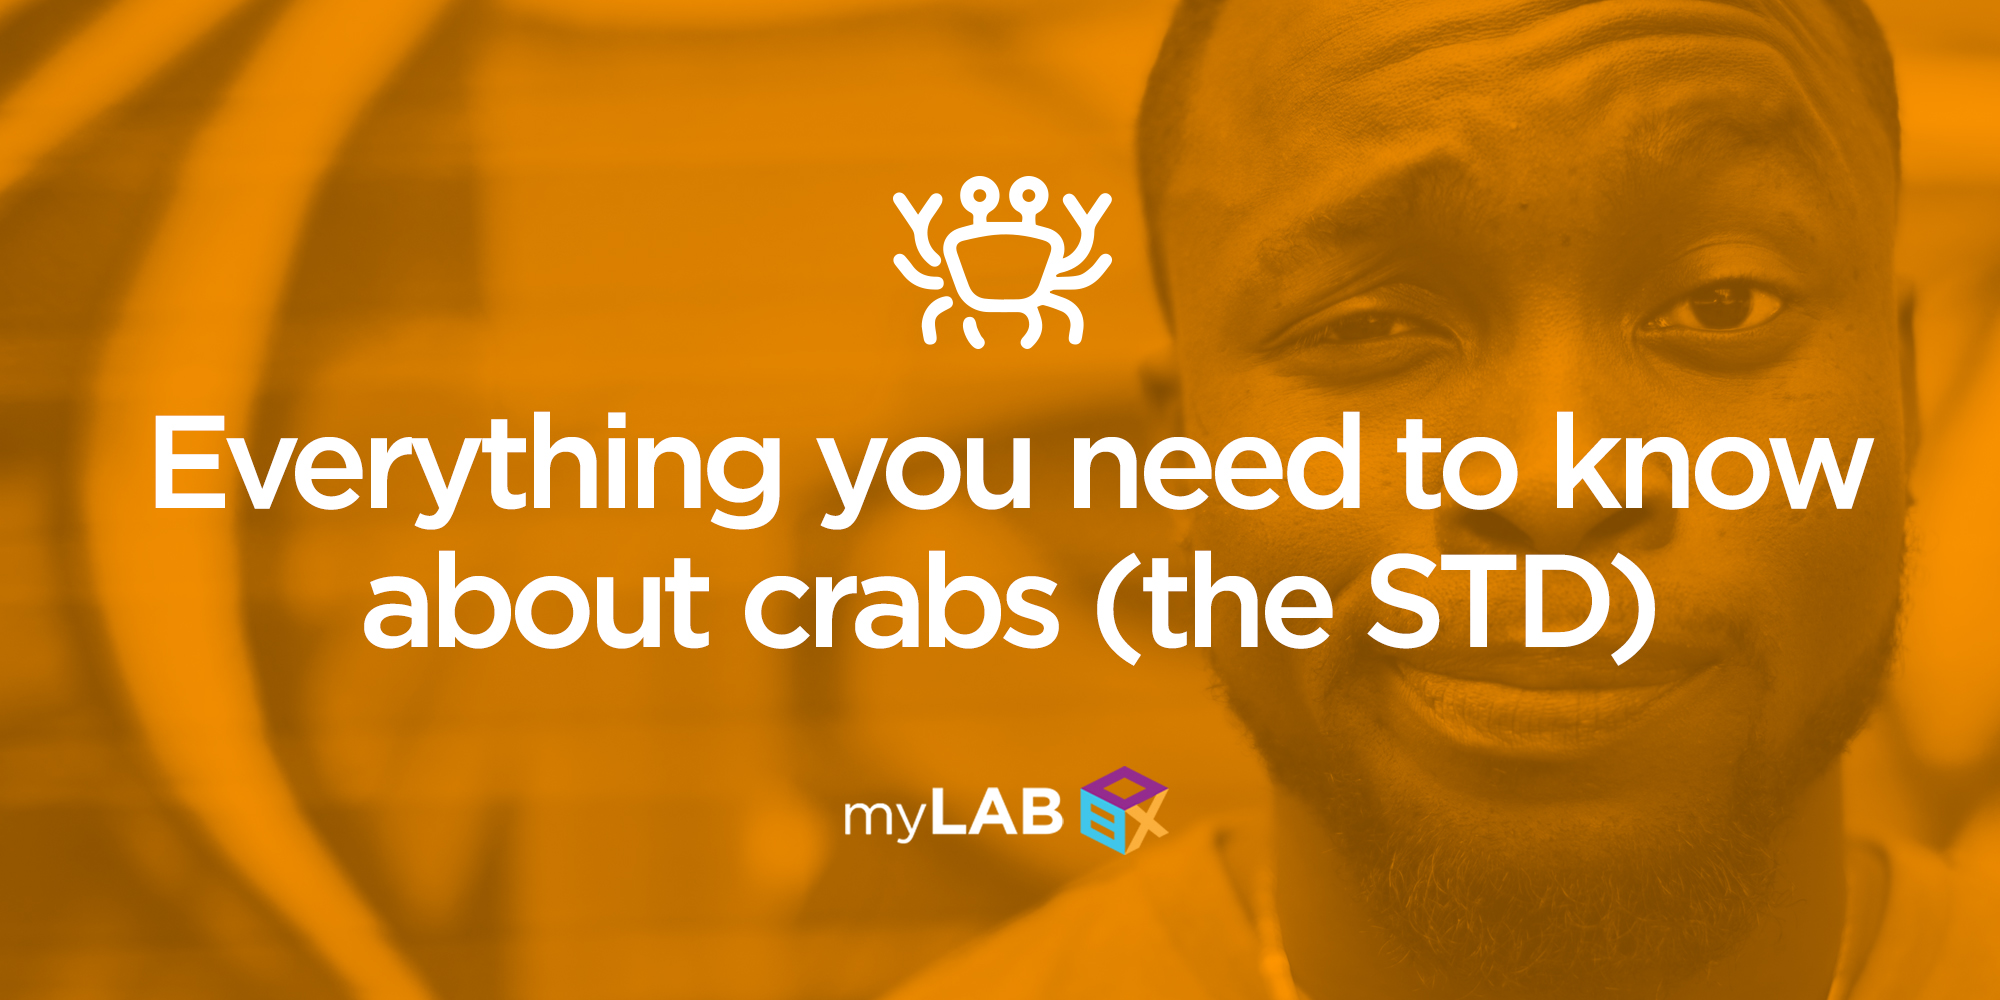 Everything you need to know about crabs (the STD)